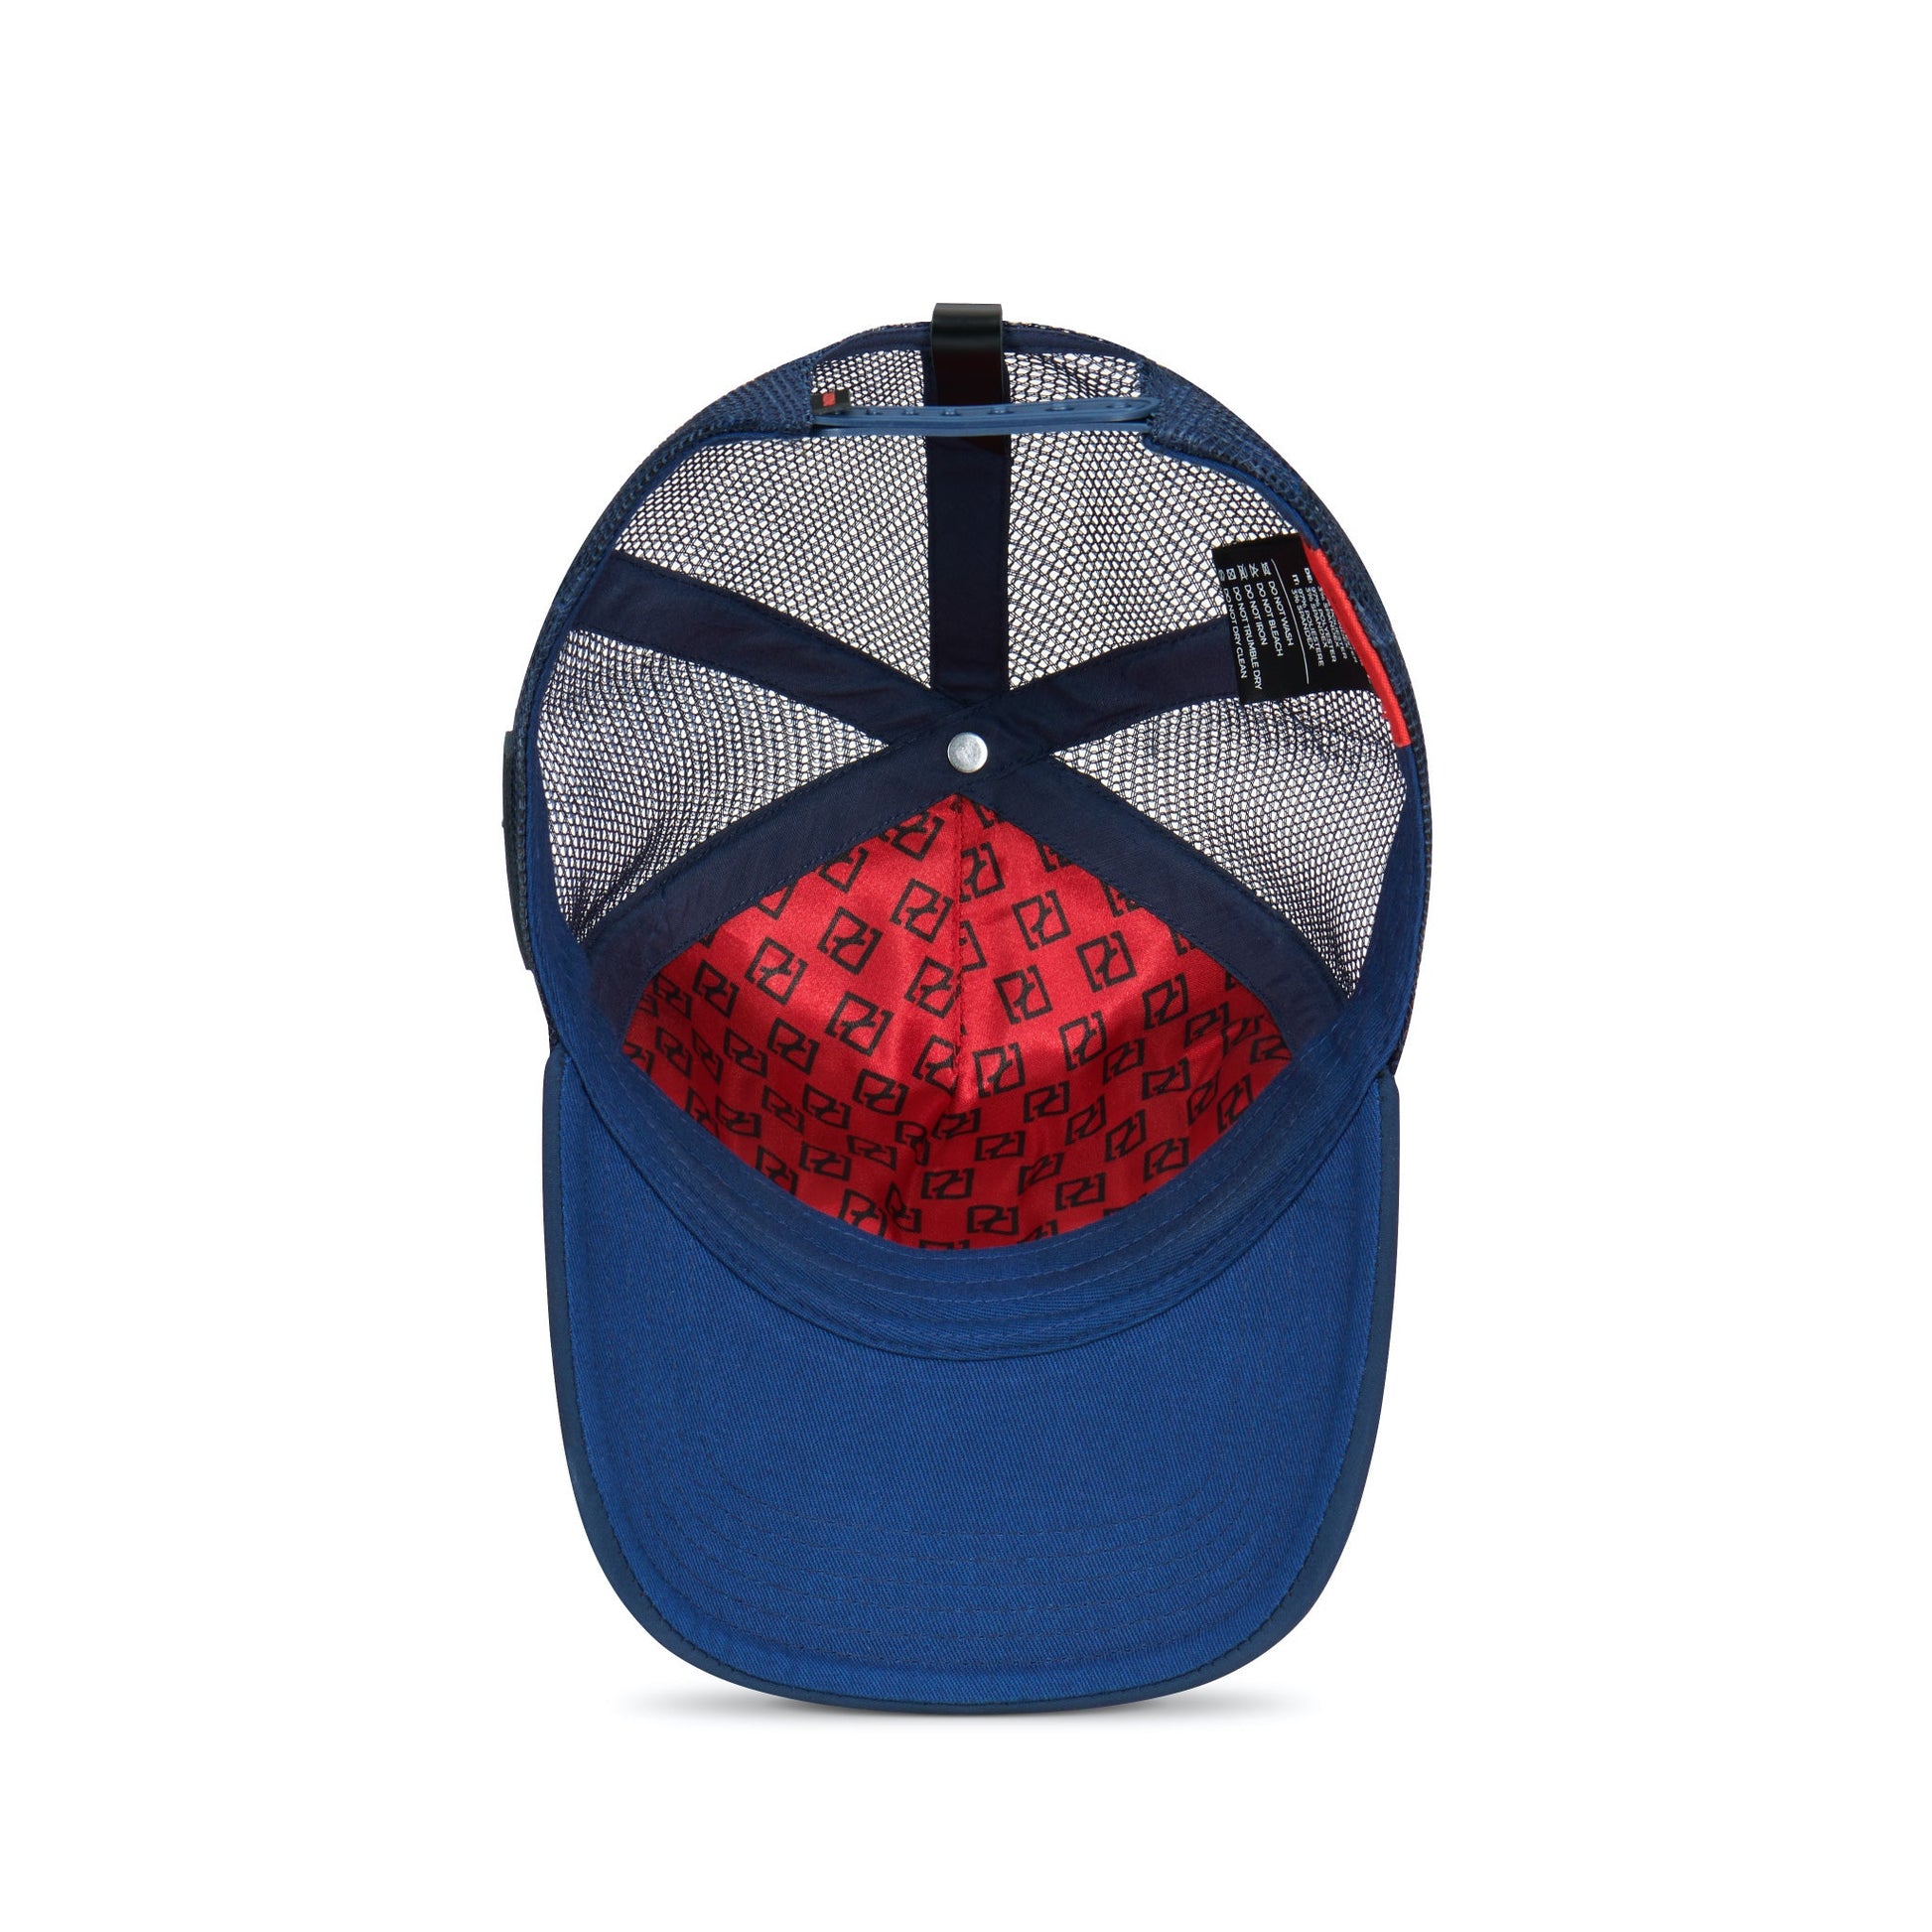 Partch Trucker Hat Navy Blue with PARTCH-Clip Je T’aime Inside View